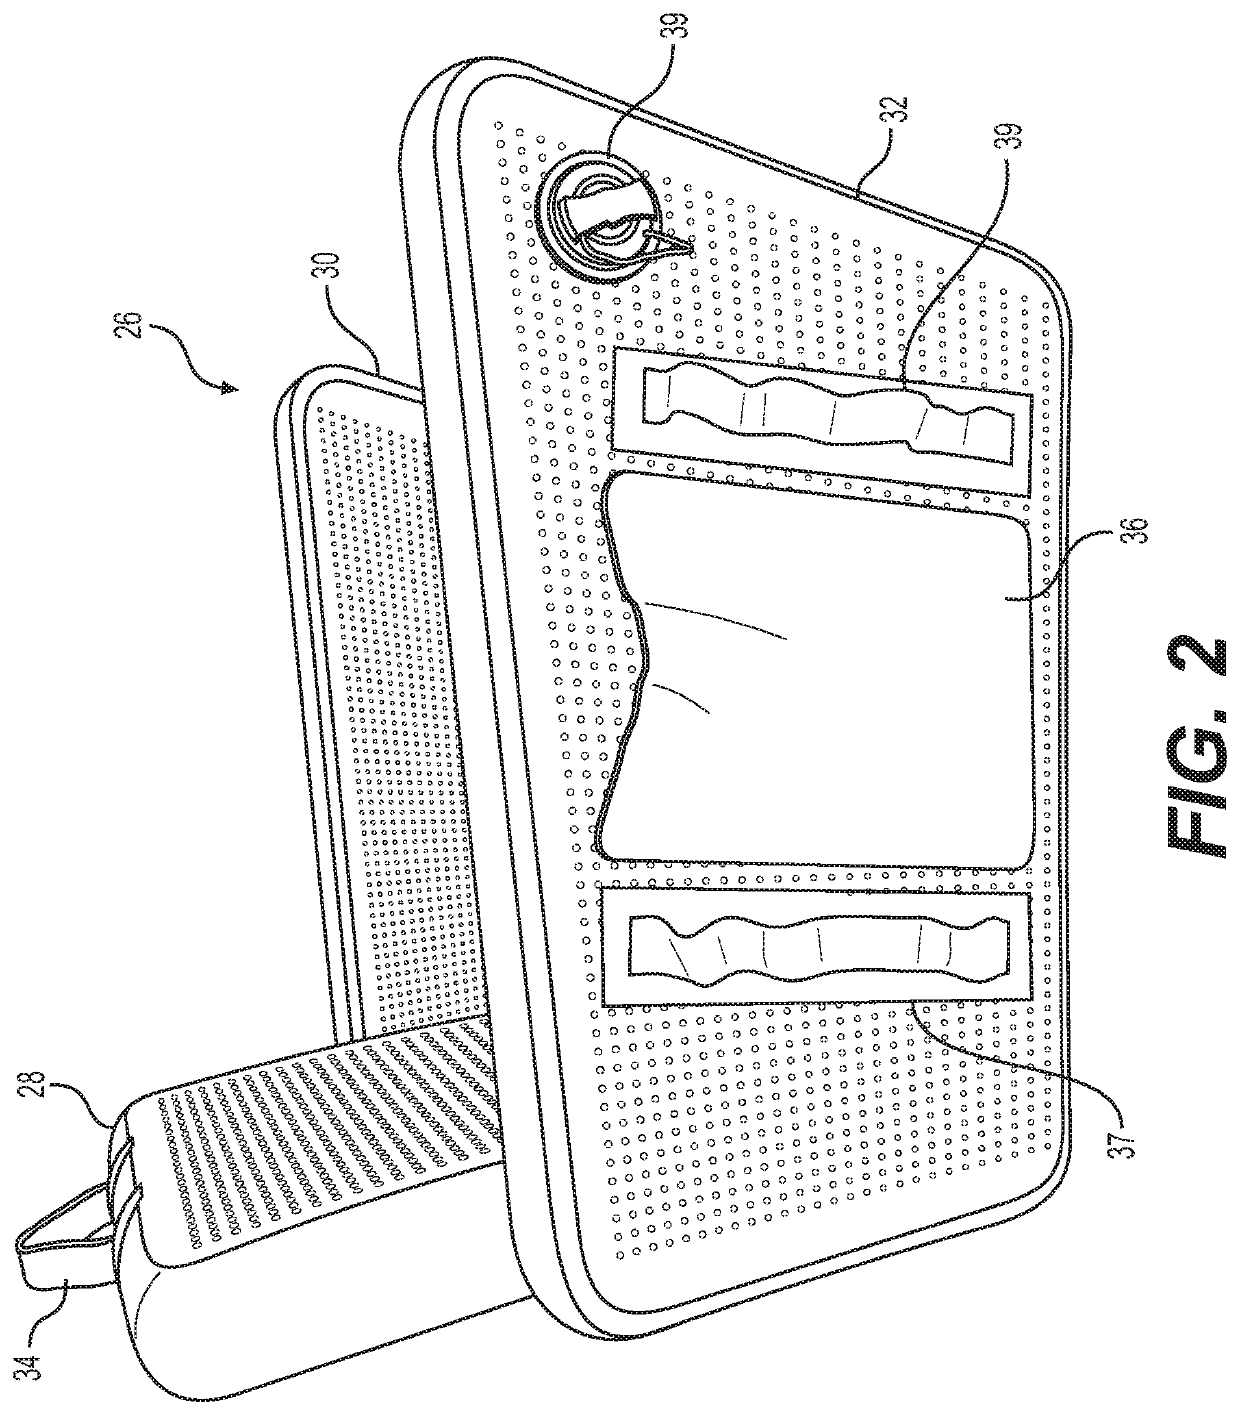 Inflatable and reconfigurable products and methods of making same